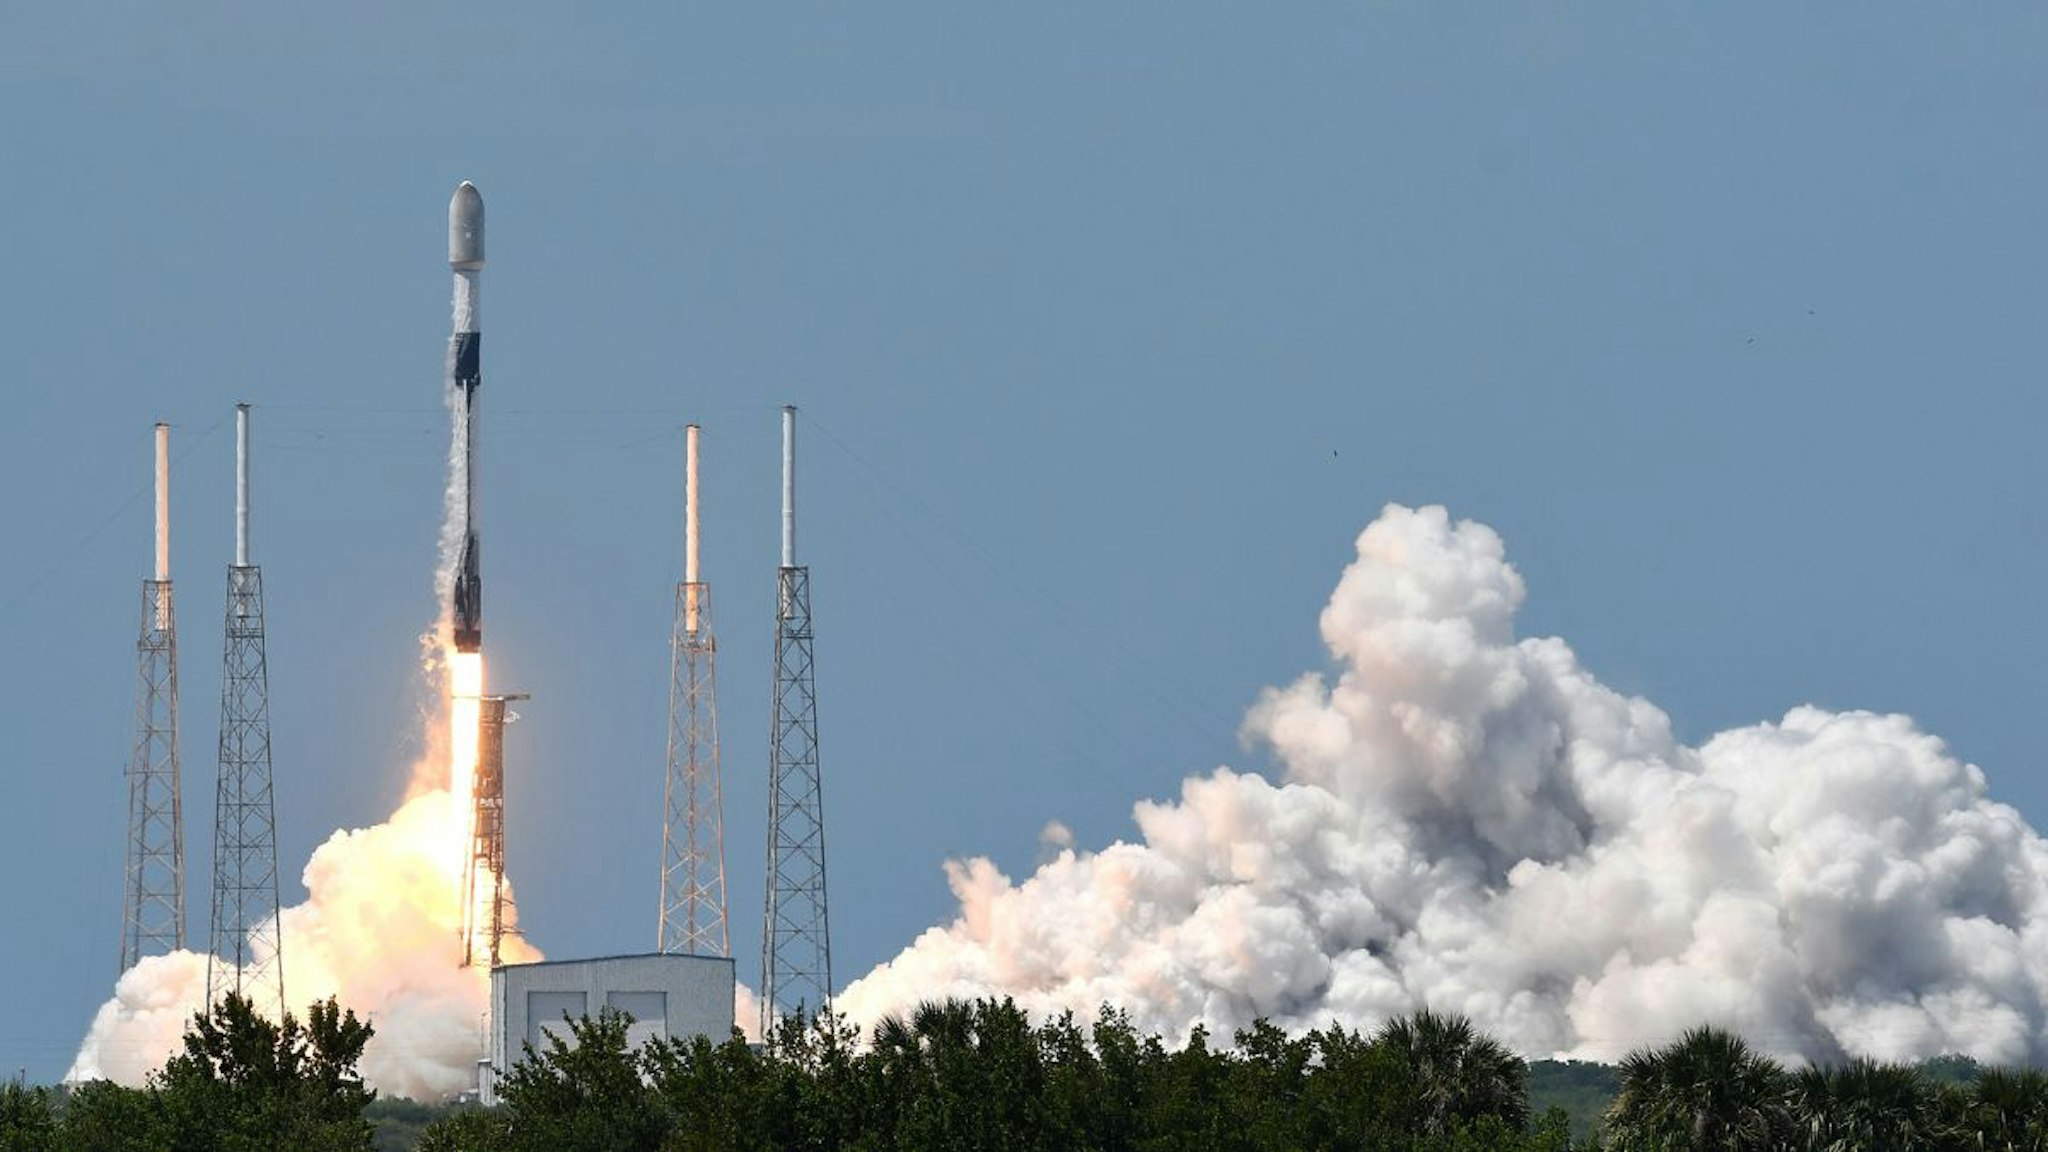 A SpaceX Falcon 9 rocket lifts off from pad 40 at the Cape Canaveral Space Force Station carrying the 29th batch of approximately 60 satellites as part of SpaceX's Starlink broadband internet network.